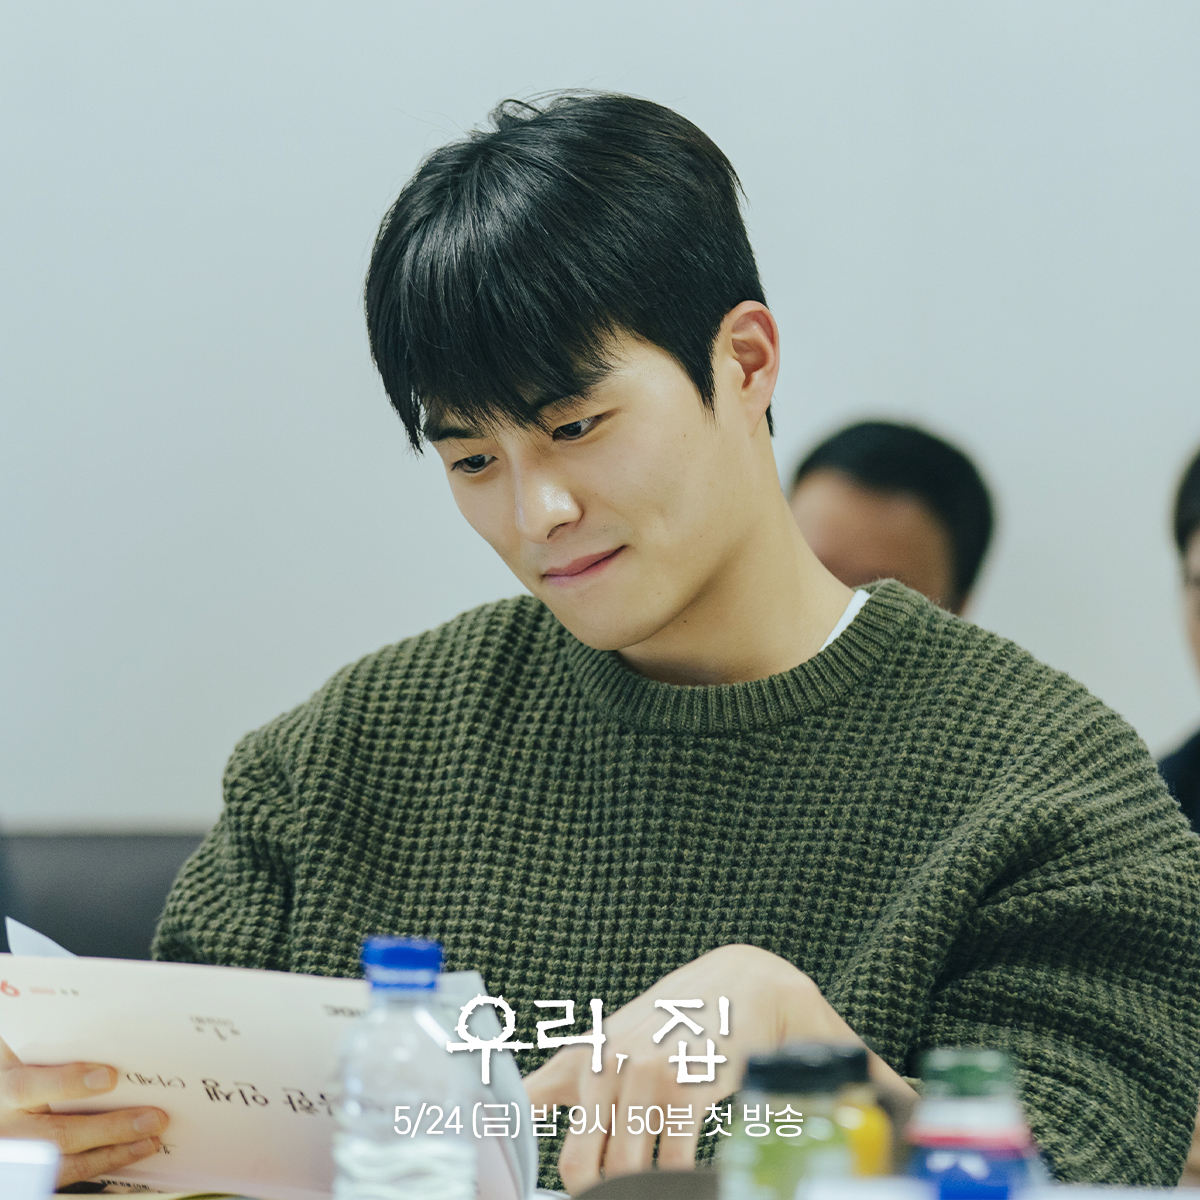 Kim Hee Sun, Lee Hye Young, Kim Nam Hee, Chansung, And More Impress At Script Reading For Upcoming Drama